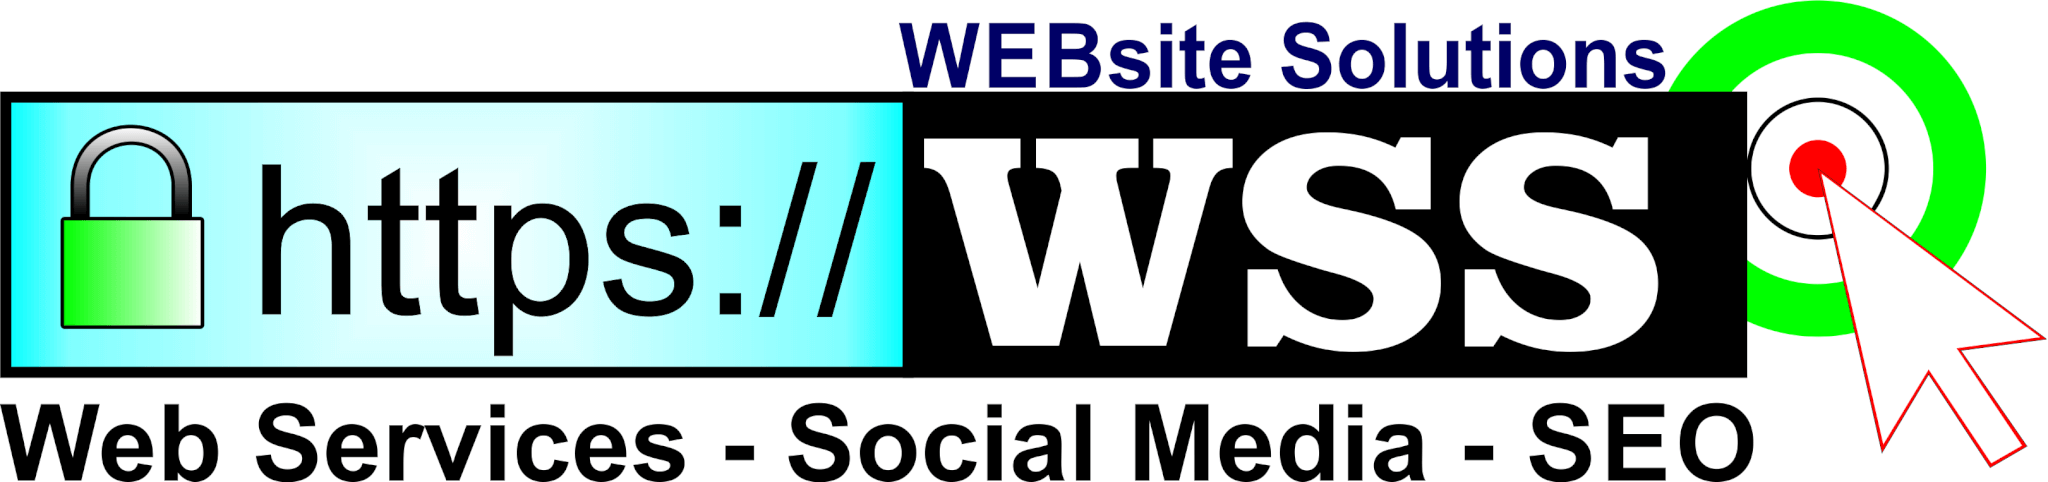 web site solutions